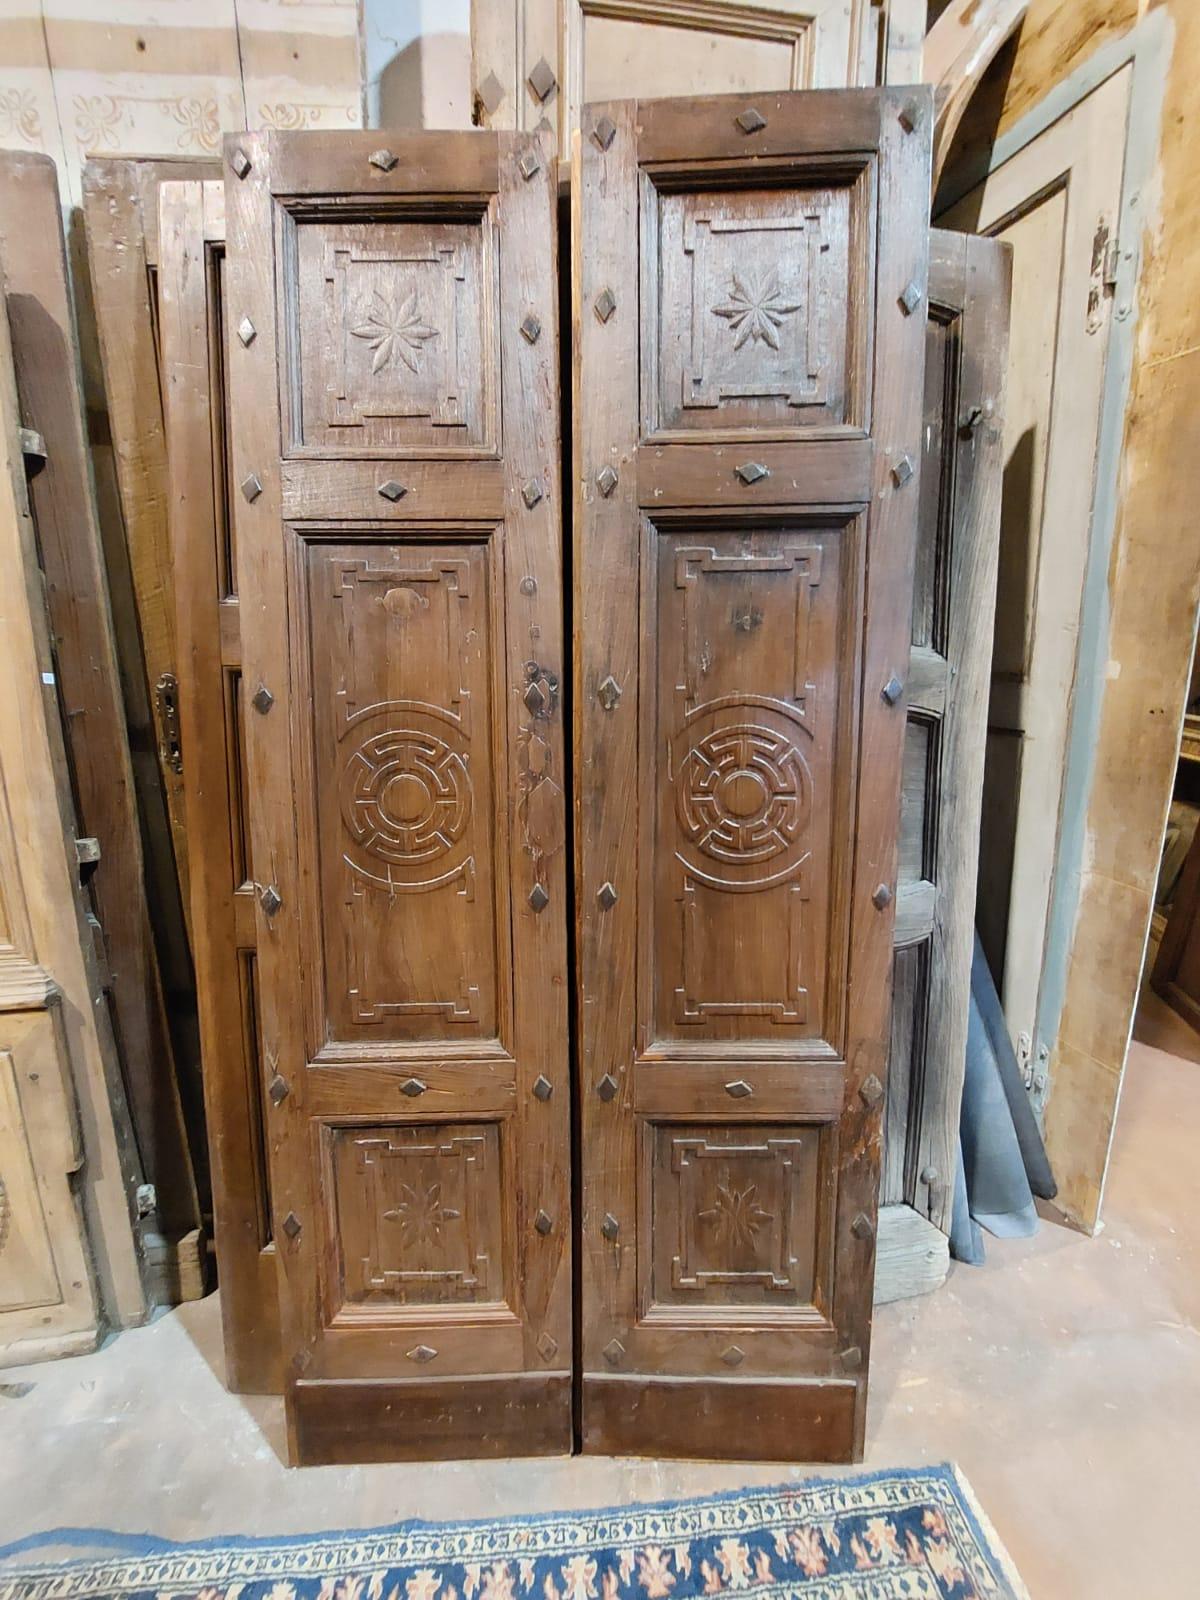 Antique double-wing entrance door, hand-carved in solid walnut with carved tile decorations, built in the middle of the 19th century for a palace entrance in northern Italy.
Well patinated, it has a smooth back and original irons, it was hung